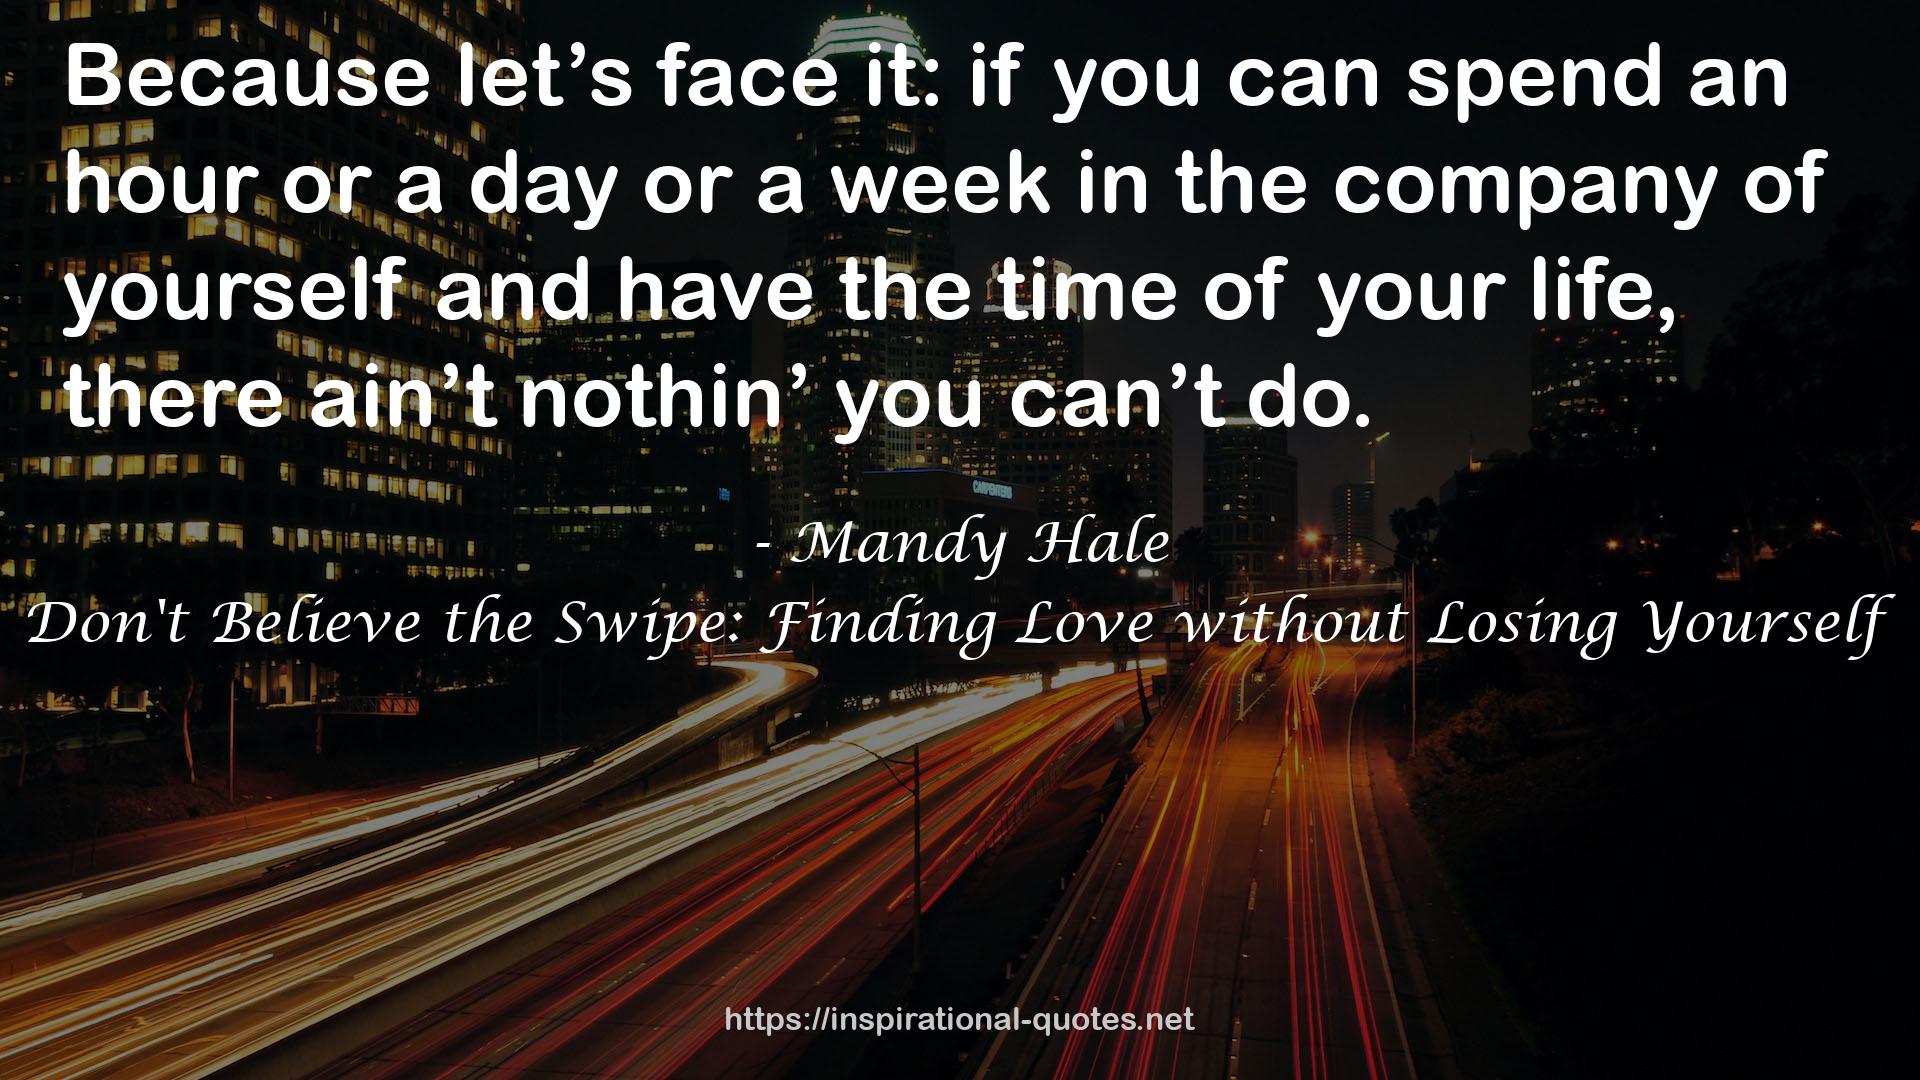 Don't Believe the Swipe: Finding Love without Losing Yourself QUOTES